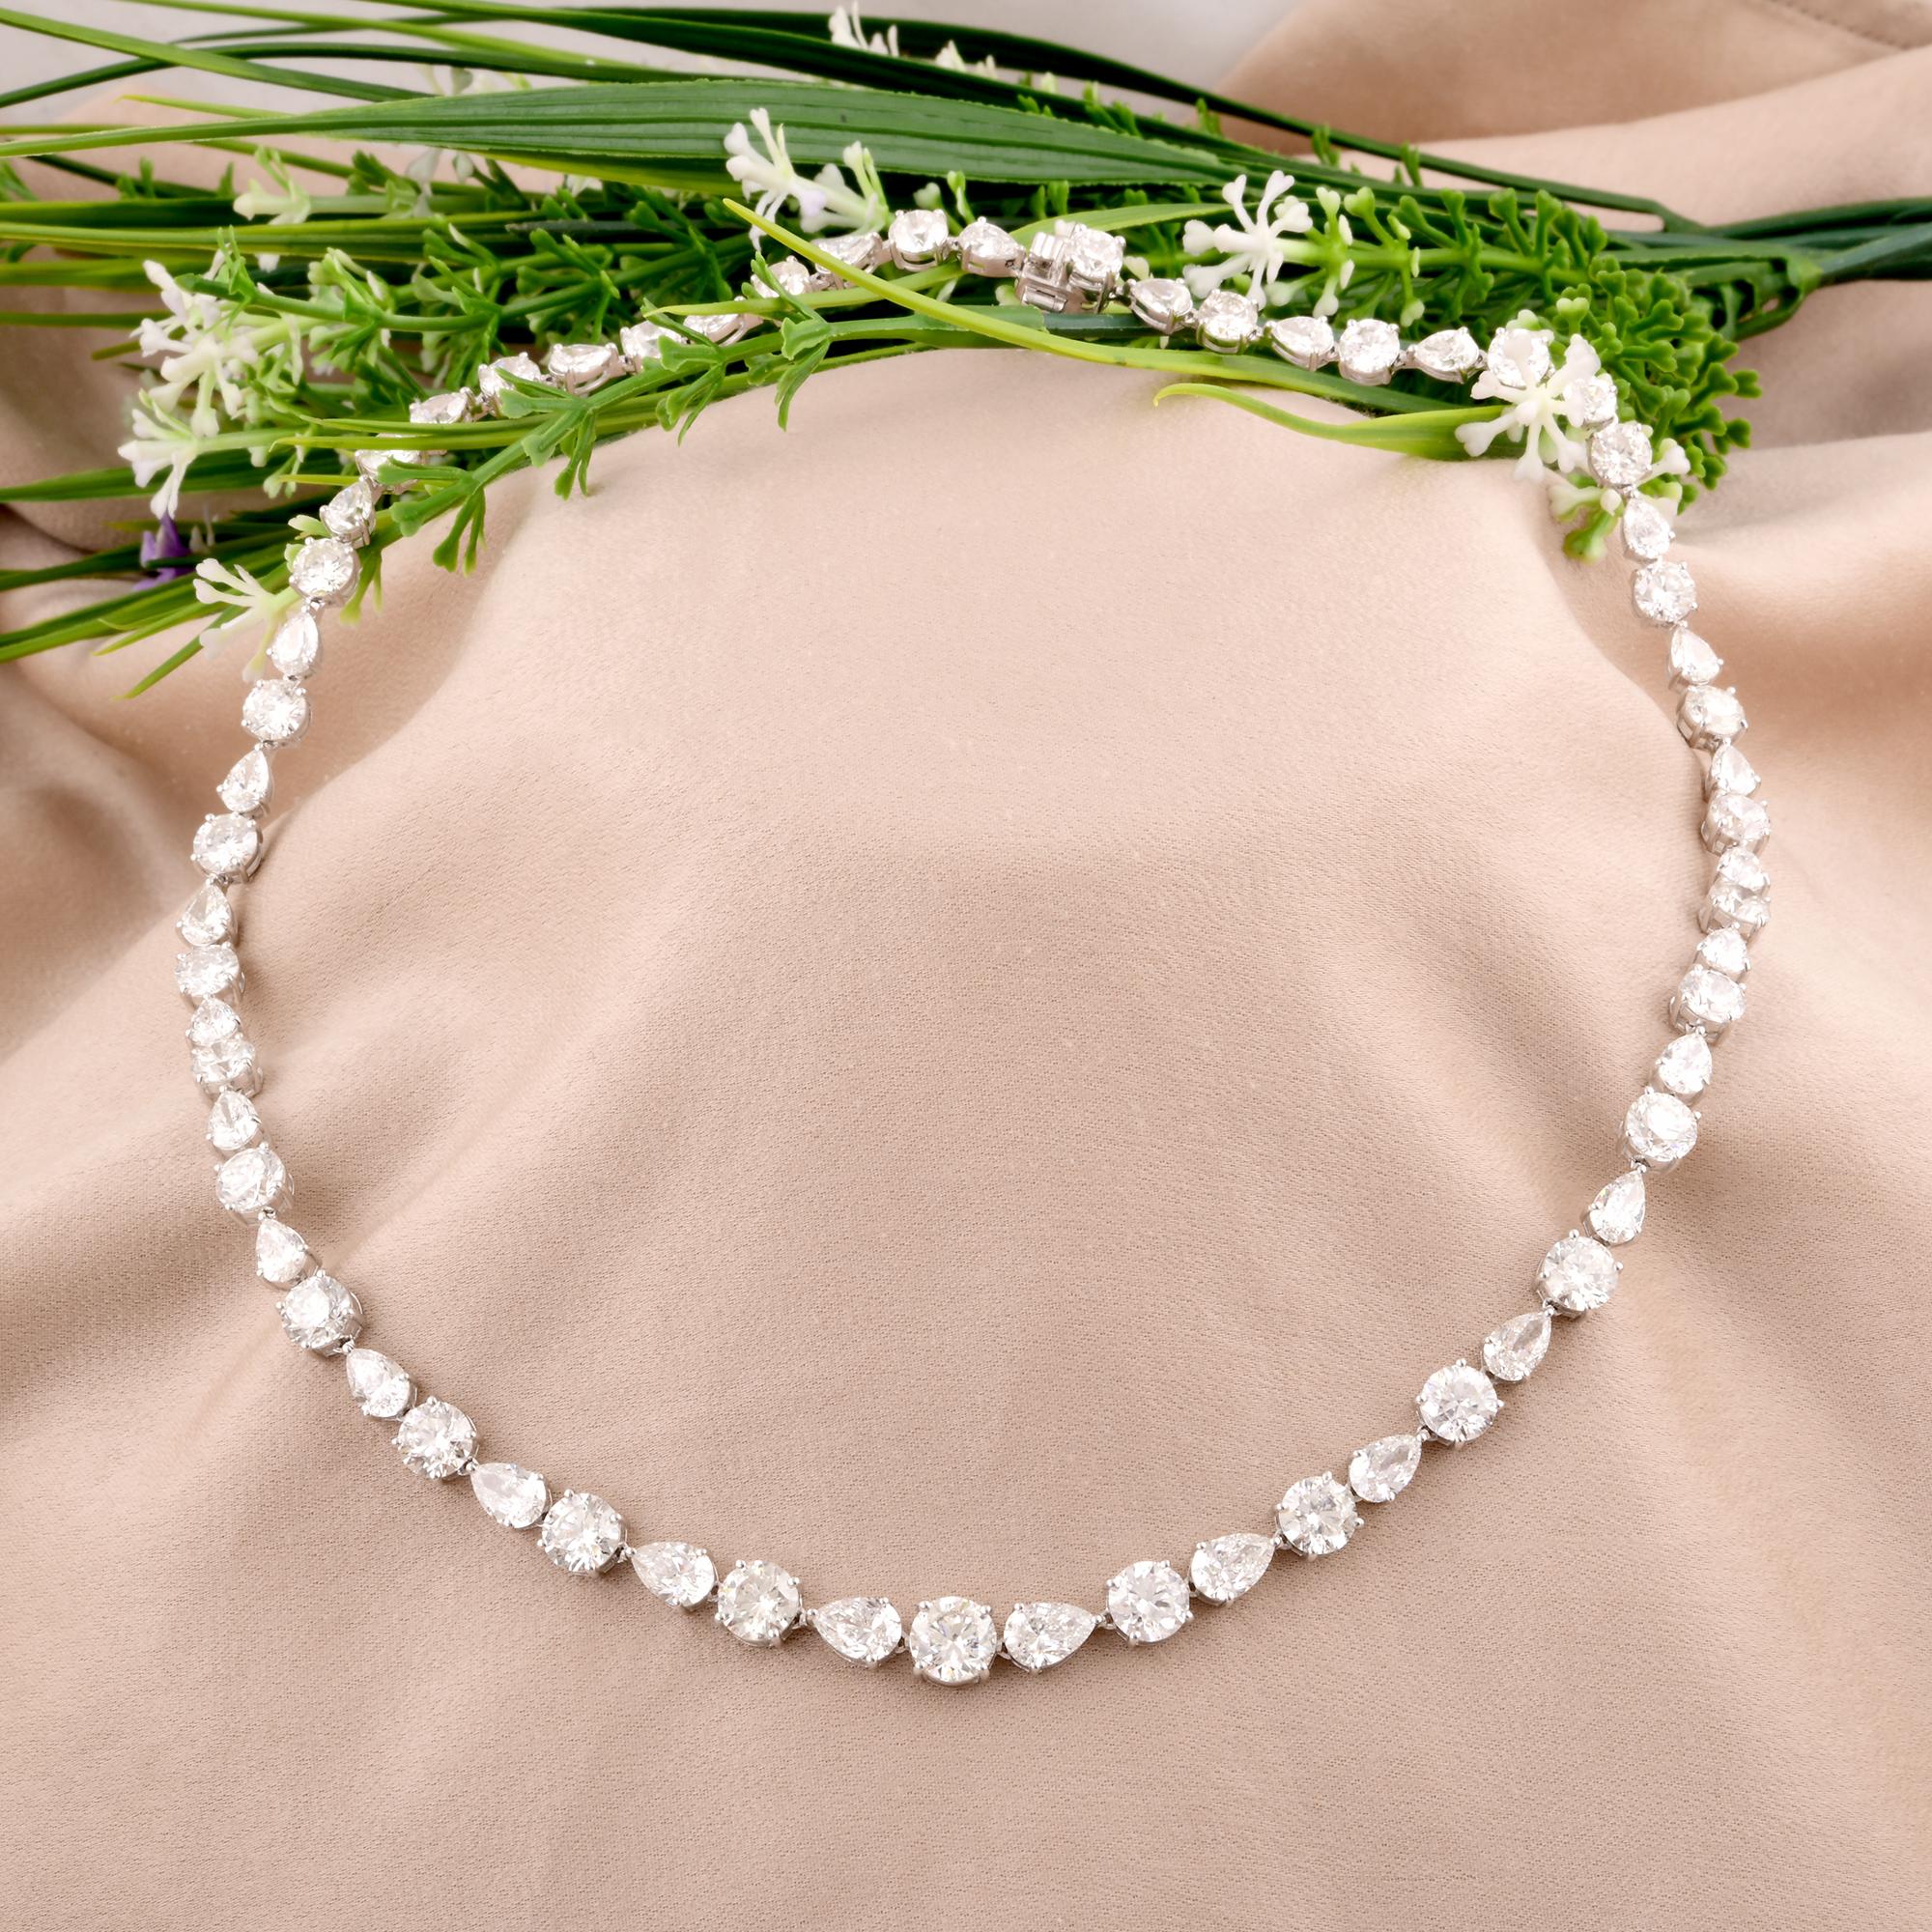 Modern 29.08 Carat Round Pear Shape Diamond Necklace Solid 14 Karat White Gold Jewelry For Sale